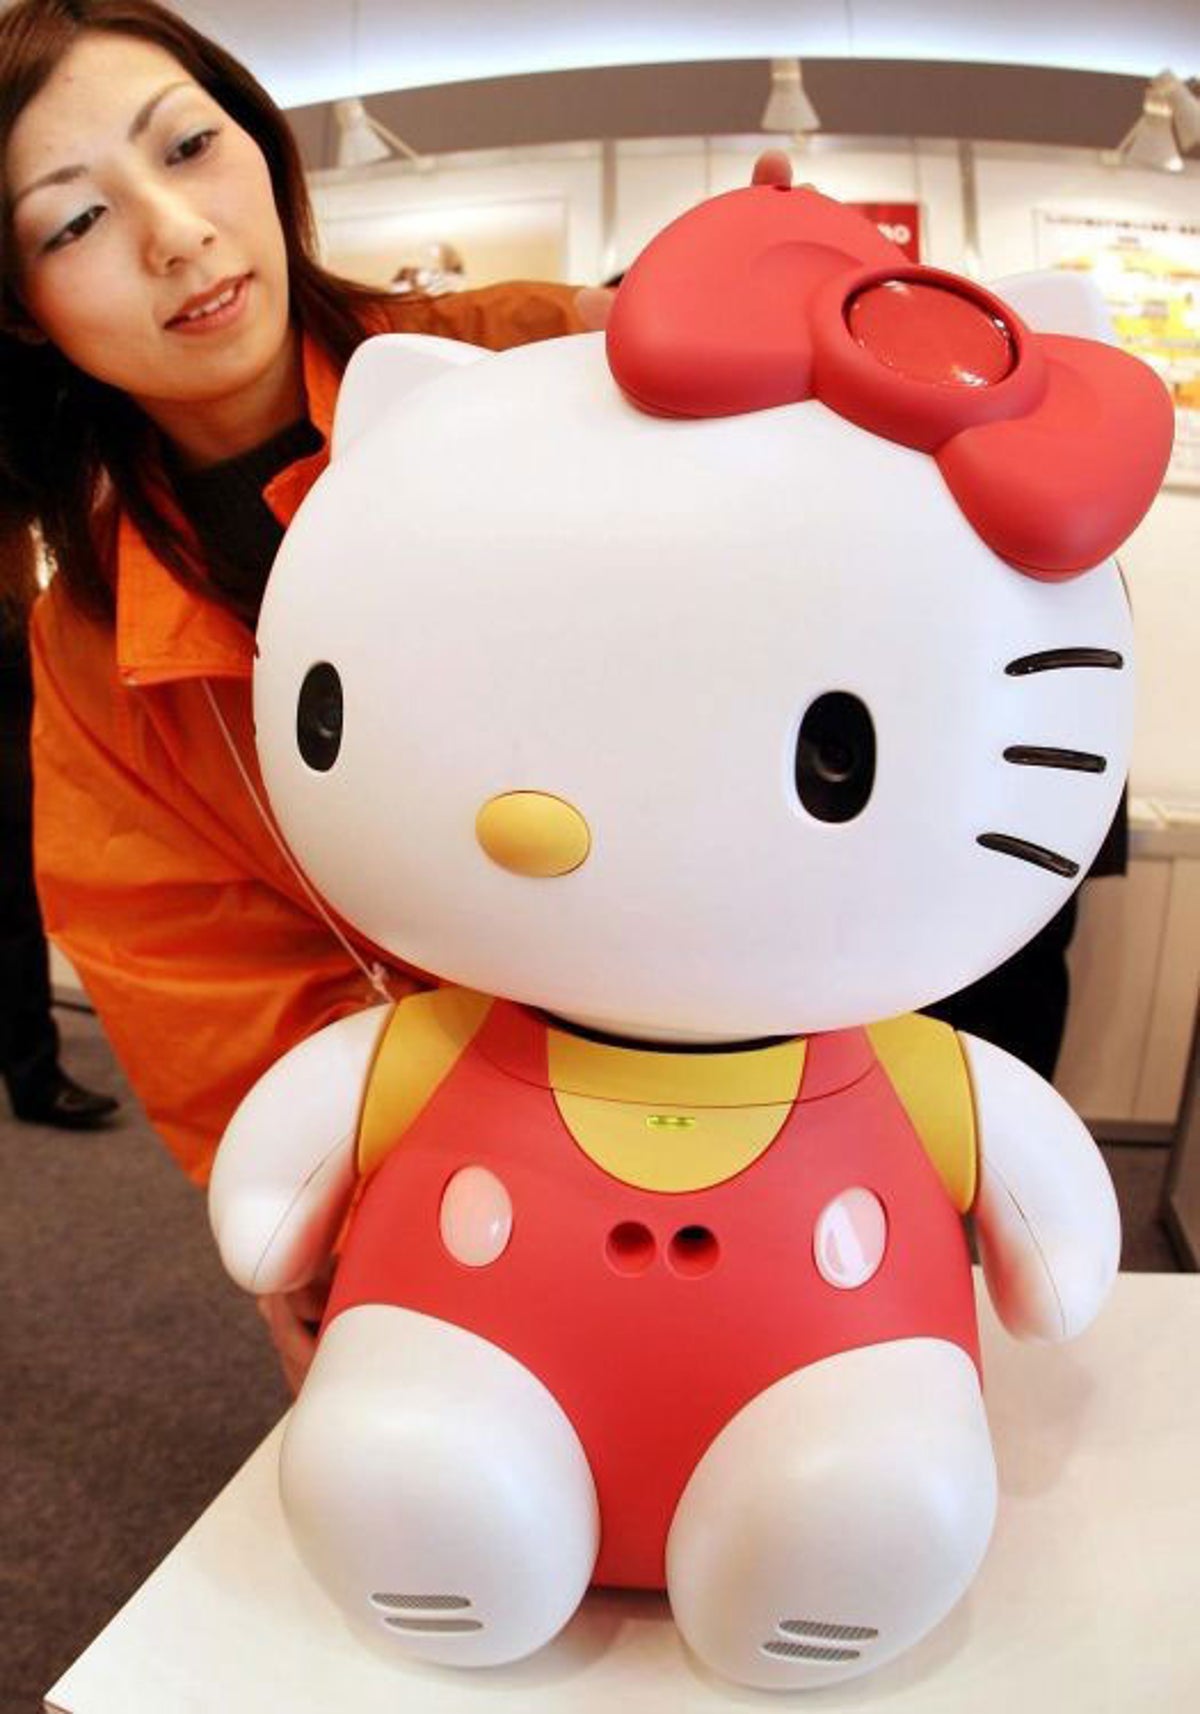 Here's What to Expect at America's First-Ever Hello Kitty Café in